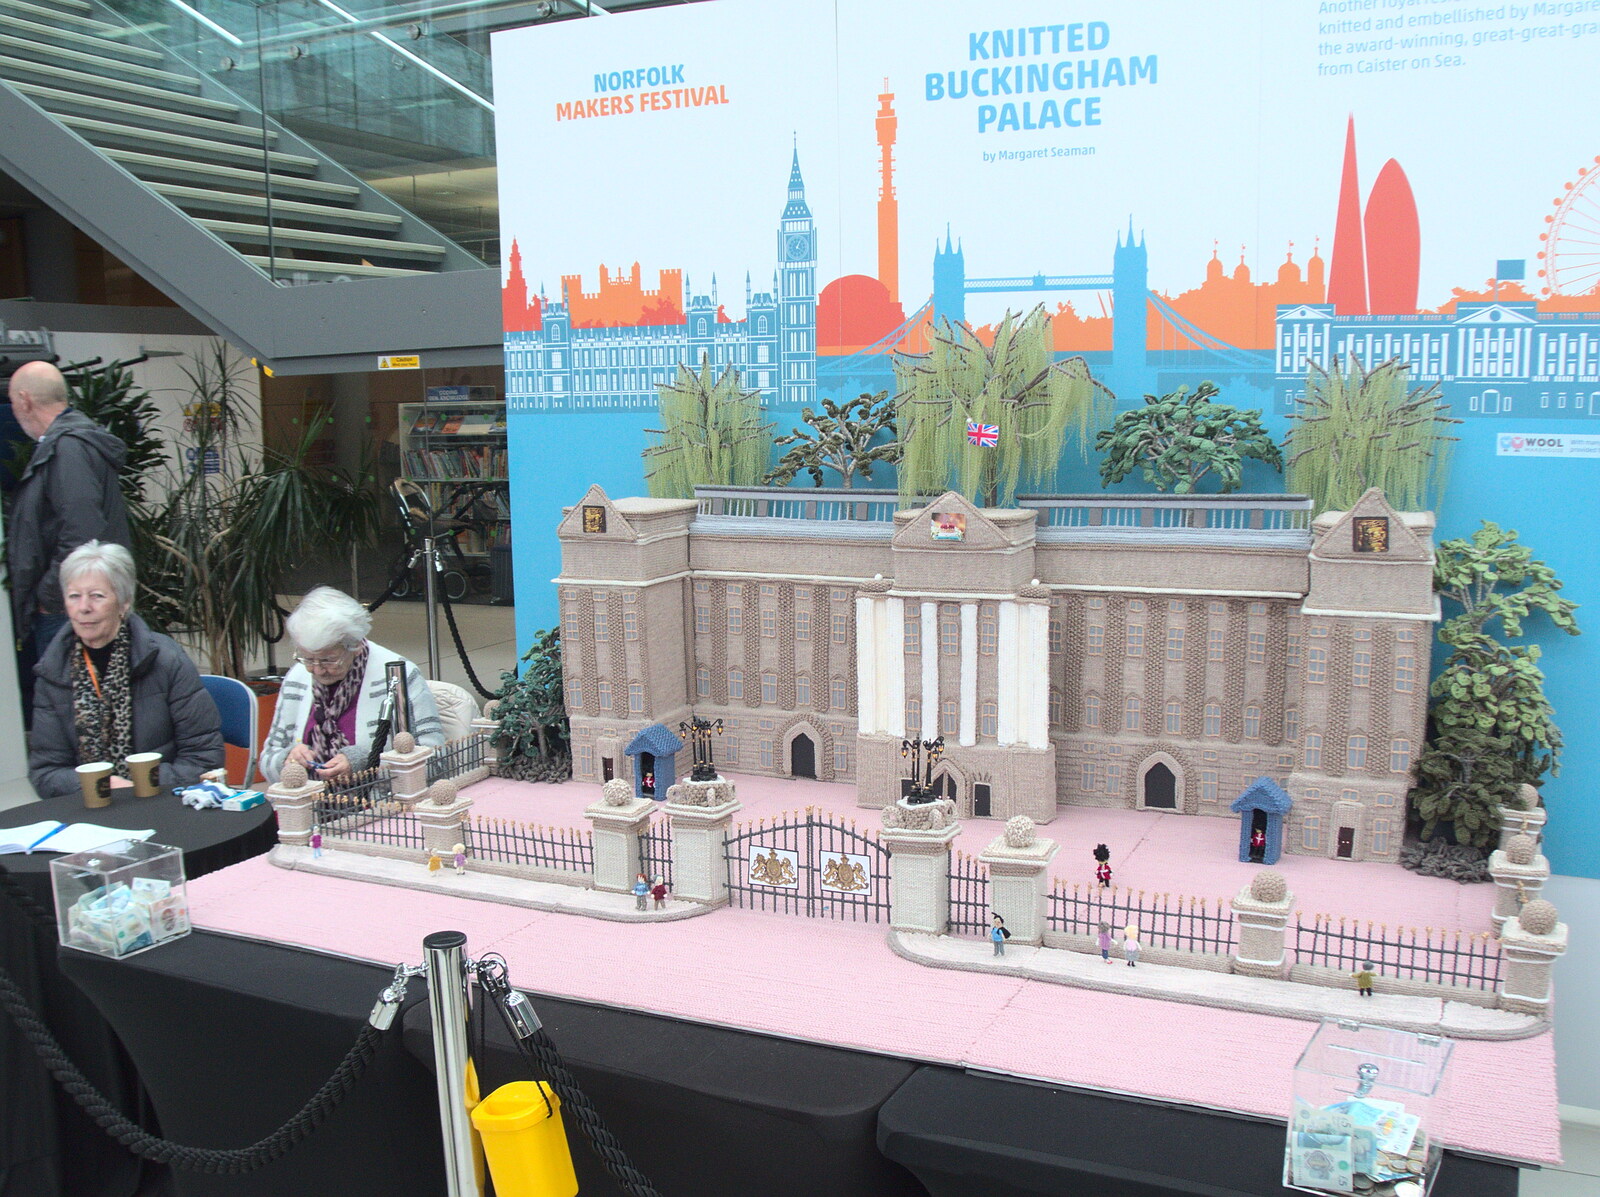 An entire knitted Buckingham Palace from It's a Stitch Up: A Trip to Norwich, Norfolk - 18th March 2023